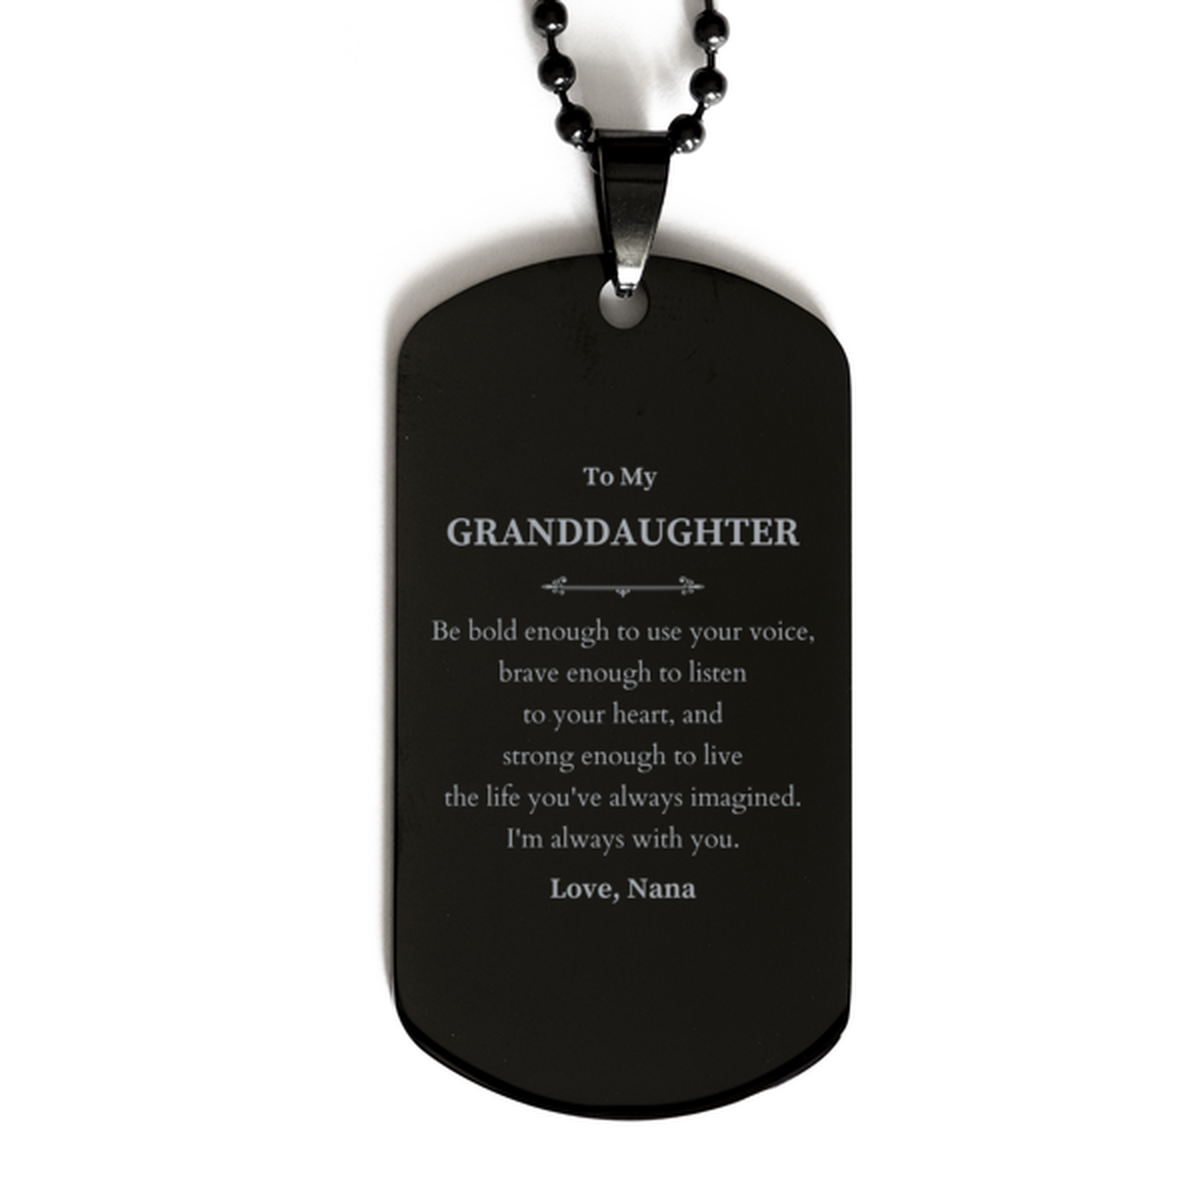 Keepsake Granddaughter Black Dog Tag Gift Idea Graduation Christmas Birthday Granddaughter from Nana, Granddaughter Be bold enough to use your voice, brave enough to listen to your heart. Love, Nana